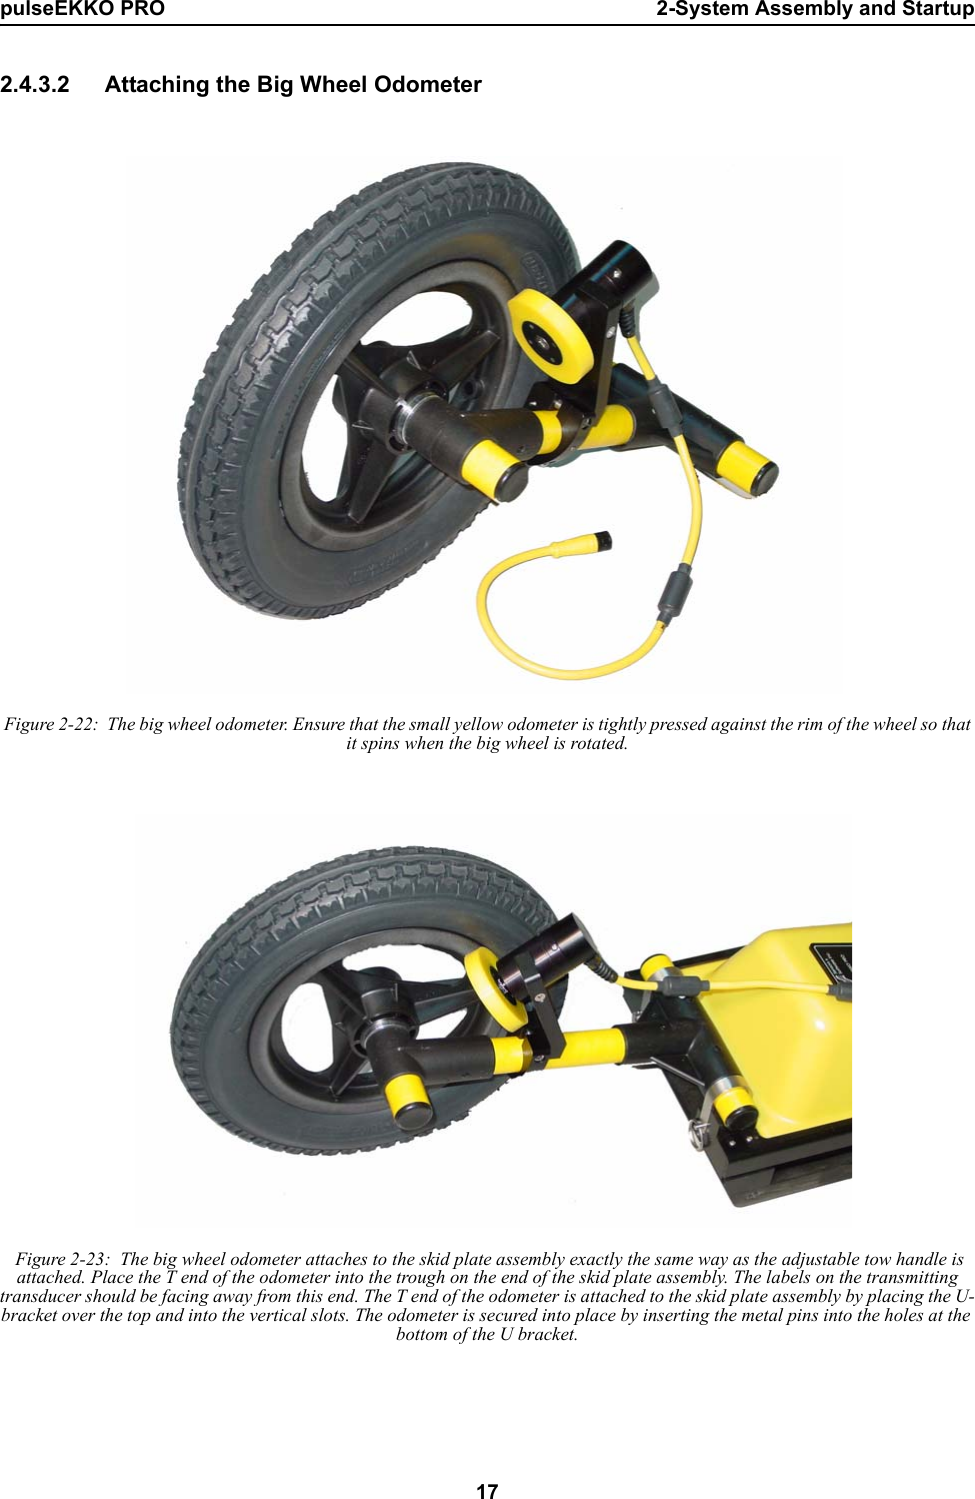 pulseEKKO PRO 2-System Assembly and Startup172.4.3.2 Attaching the Big Wheel Odometer Figure 2-22:  The big wheel odometer. Ensure that the small yellow odometer is tightly pressed against the rim of the wheel so that it spins when the big wheel is rotated. Figure 2-23:  The big wheel odometer attaches to the skid plate assembly exactly the same way as the adjustable tow handle is attached. Place the T end of the odometer into the trough on the end of the skid plate assembly. The labels on the transmitting transducer should be facing away from this end. The T end of the odometer is attached to the skid plate assembly by placing the U-bracket over the top and into the vertical slots. The odometer is secured into place by inserting the metal pins into the holes at the bottom of the U bracket.